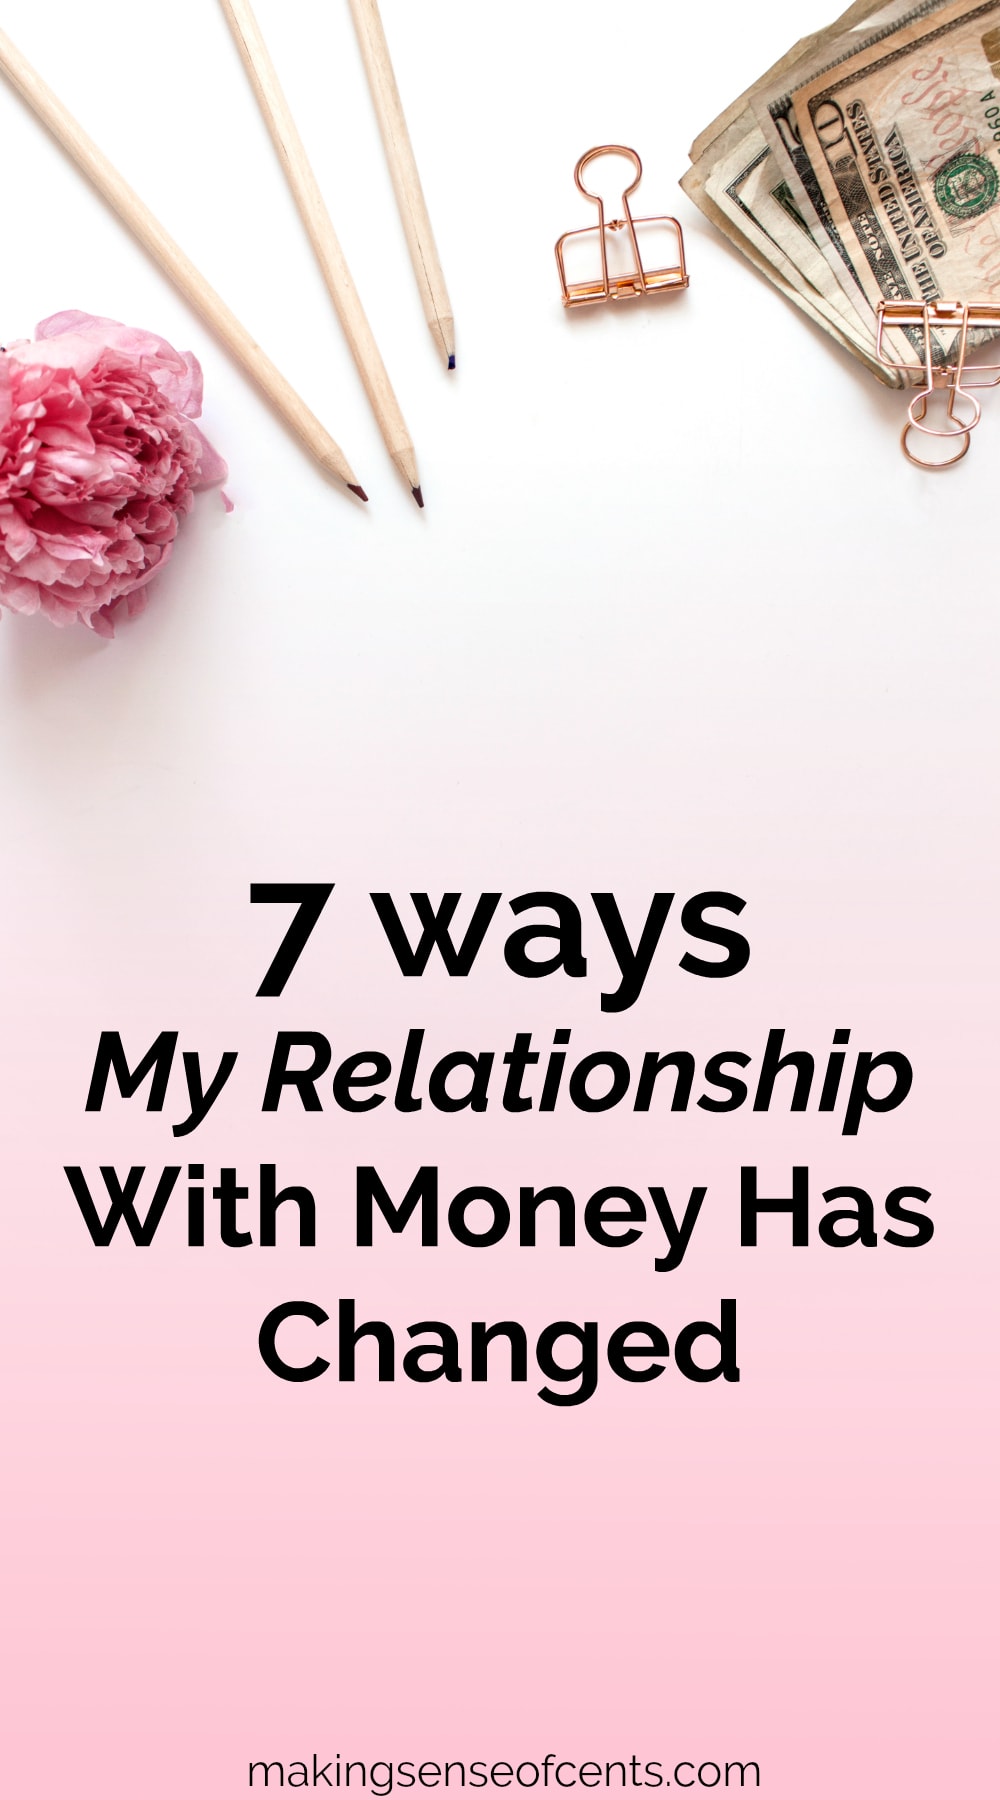 7 Ways My Relationship With Money Has Changed